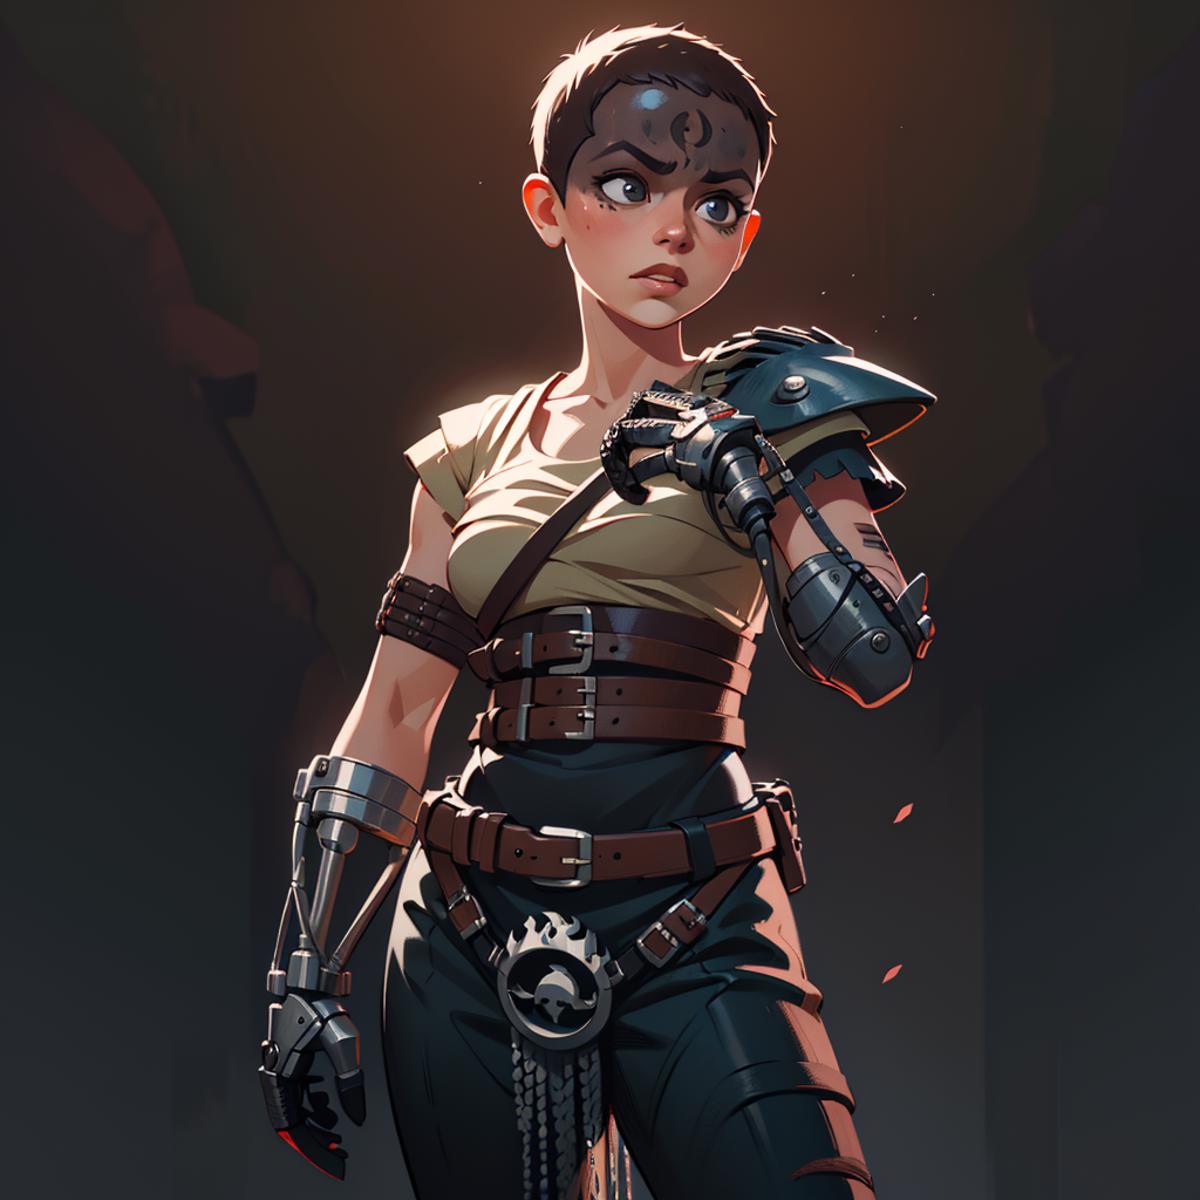 Imperator Furiosa (Comic/Anime version) - Mad Max: Fury Road image by infamous__fish